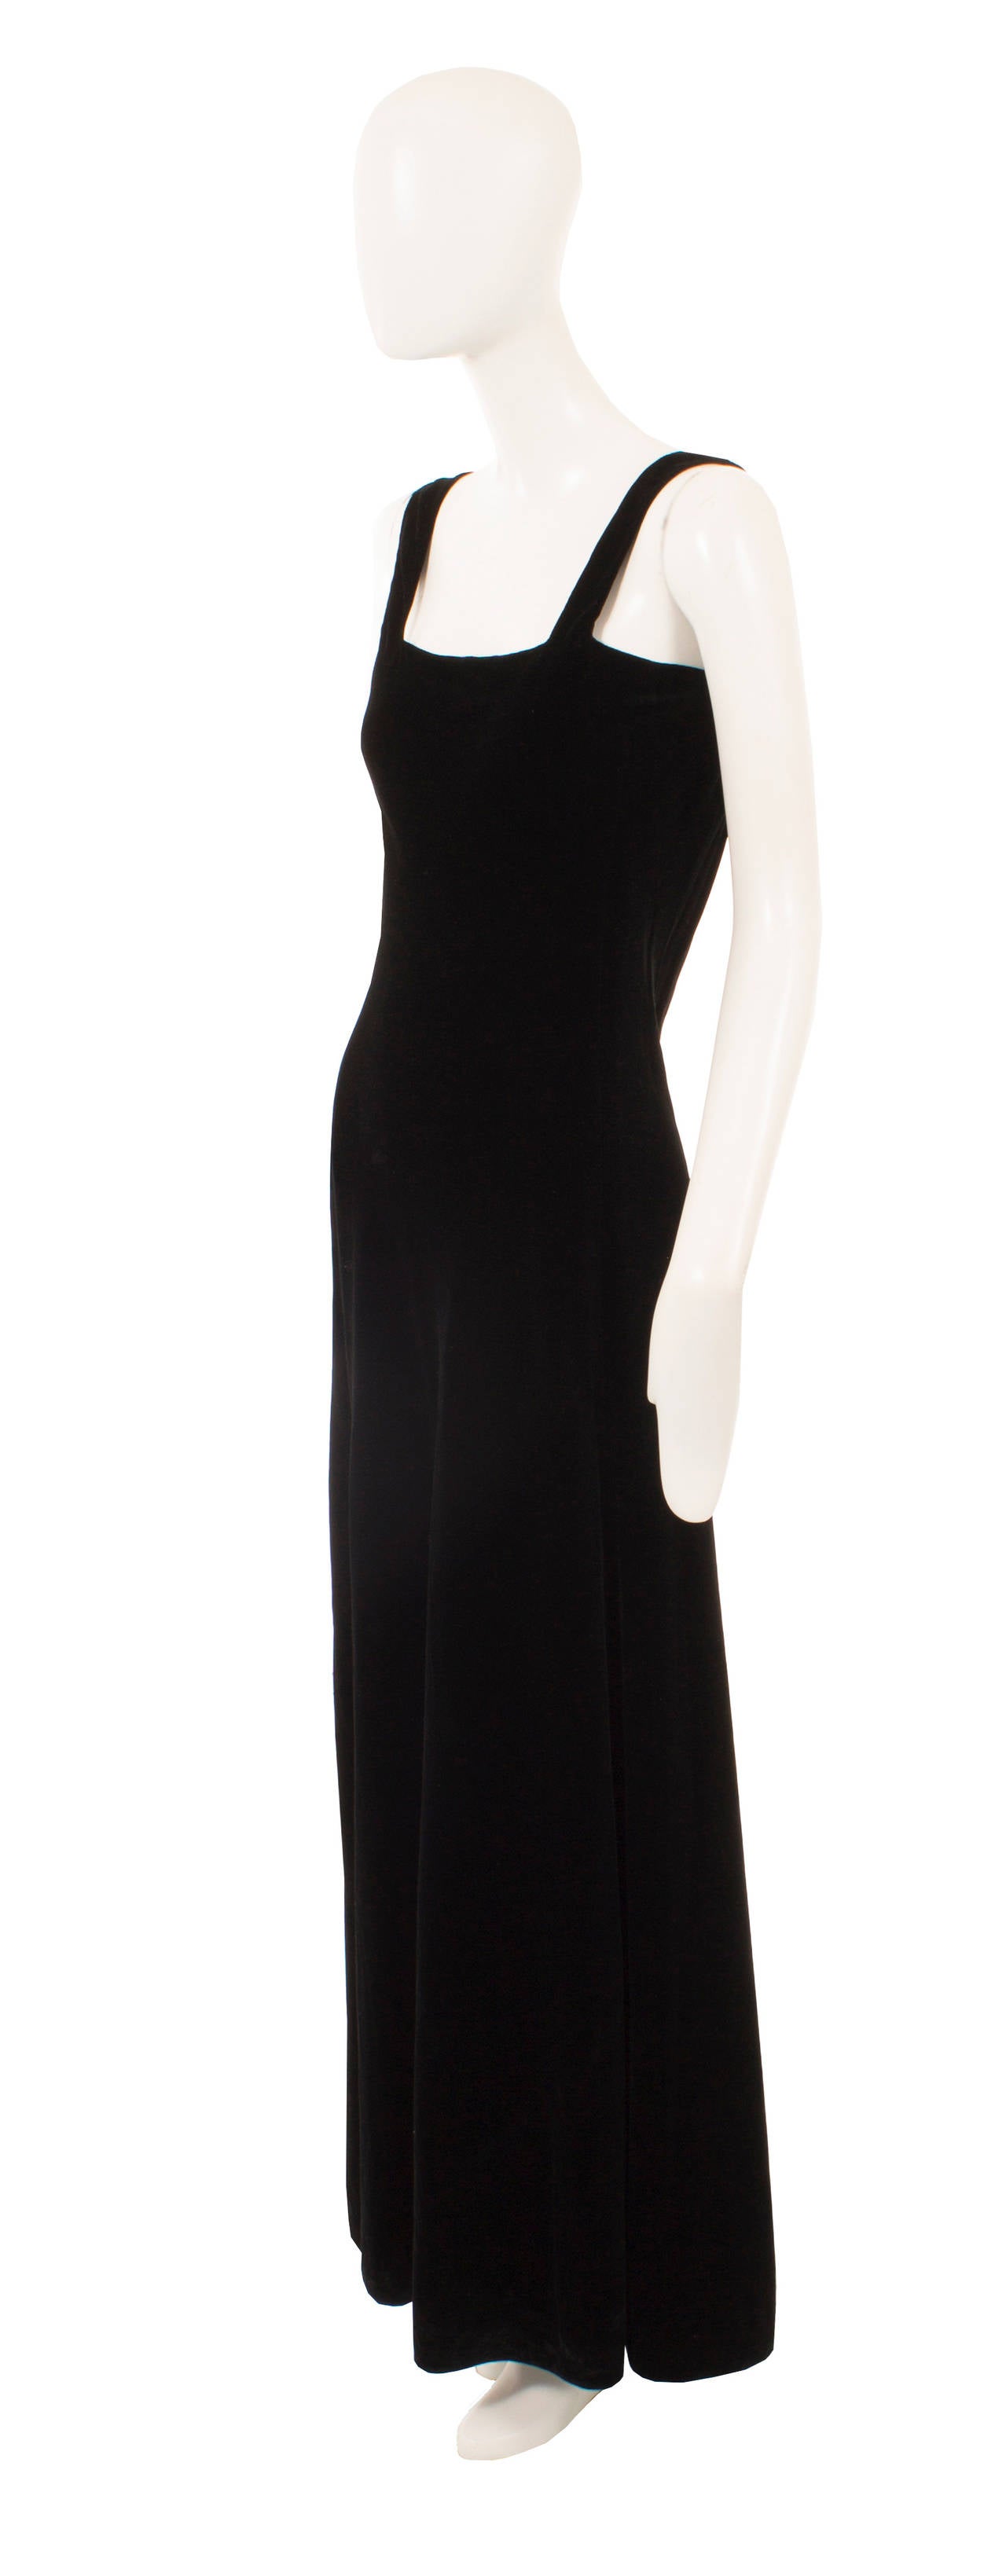 The epitome of chic, this dress is an exquisite example of Lanvin haute couture and looks as contemporary today as it did in 1933. Constructed in sumptuous black velvet and cut on the bias for an incredibly flattering silhouette, the dress falls